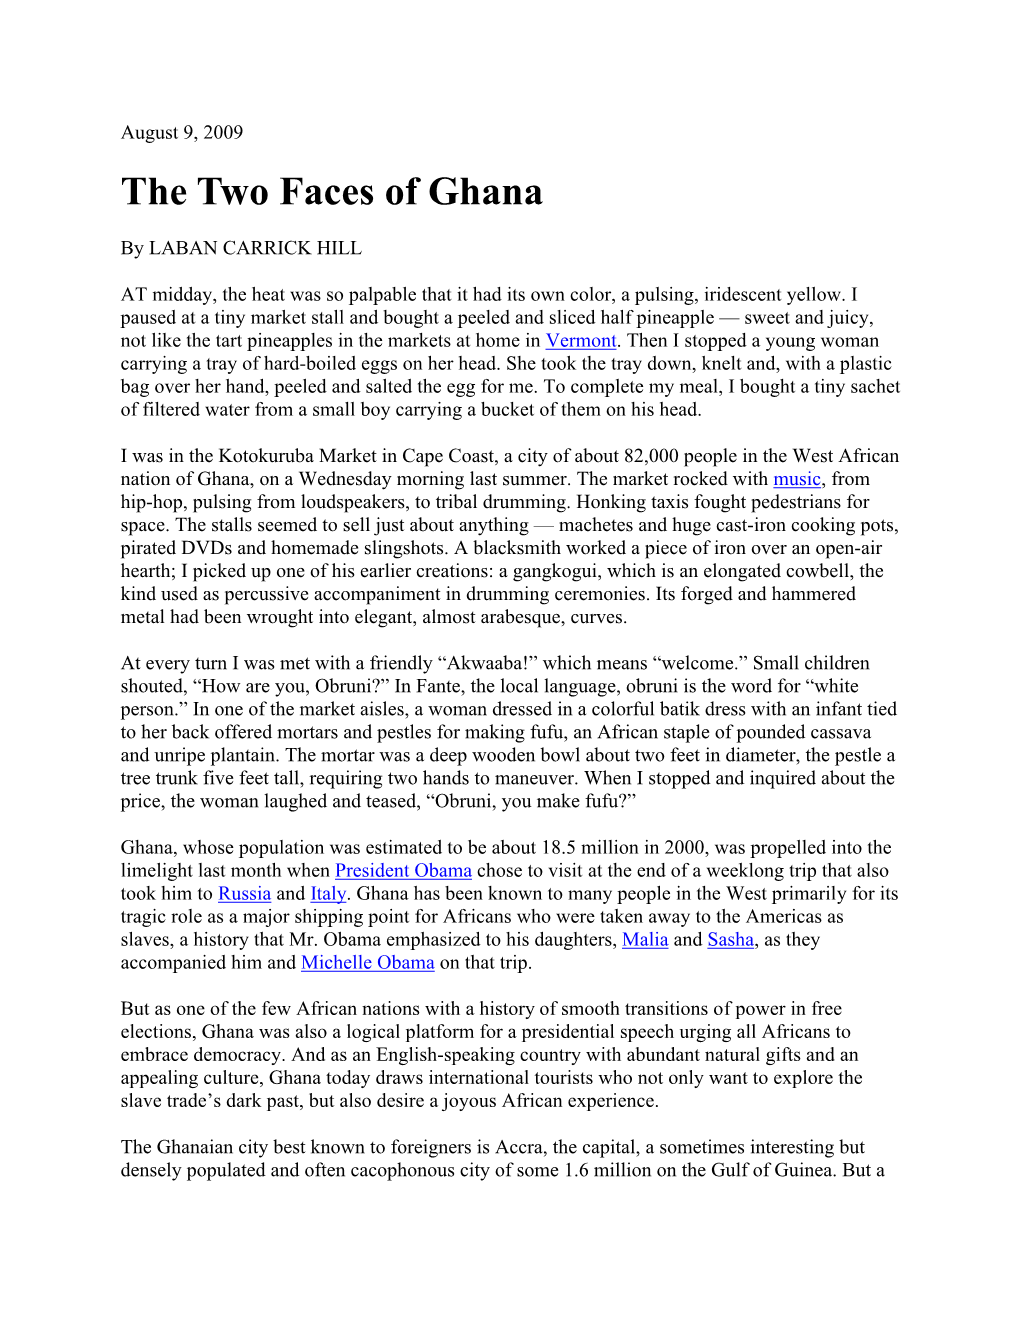 The Two Faces of Ghana